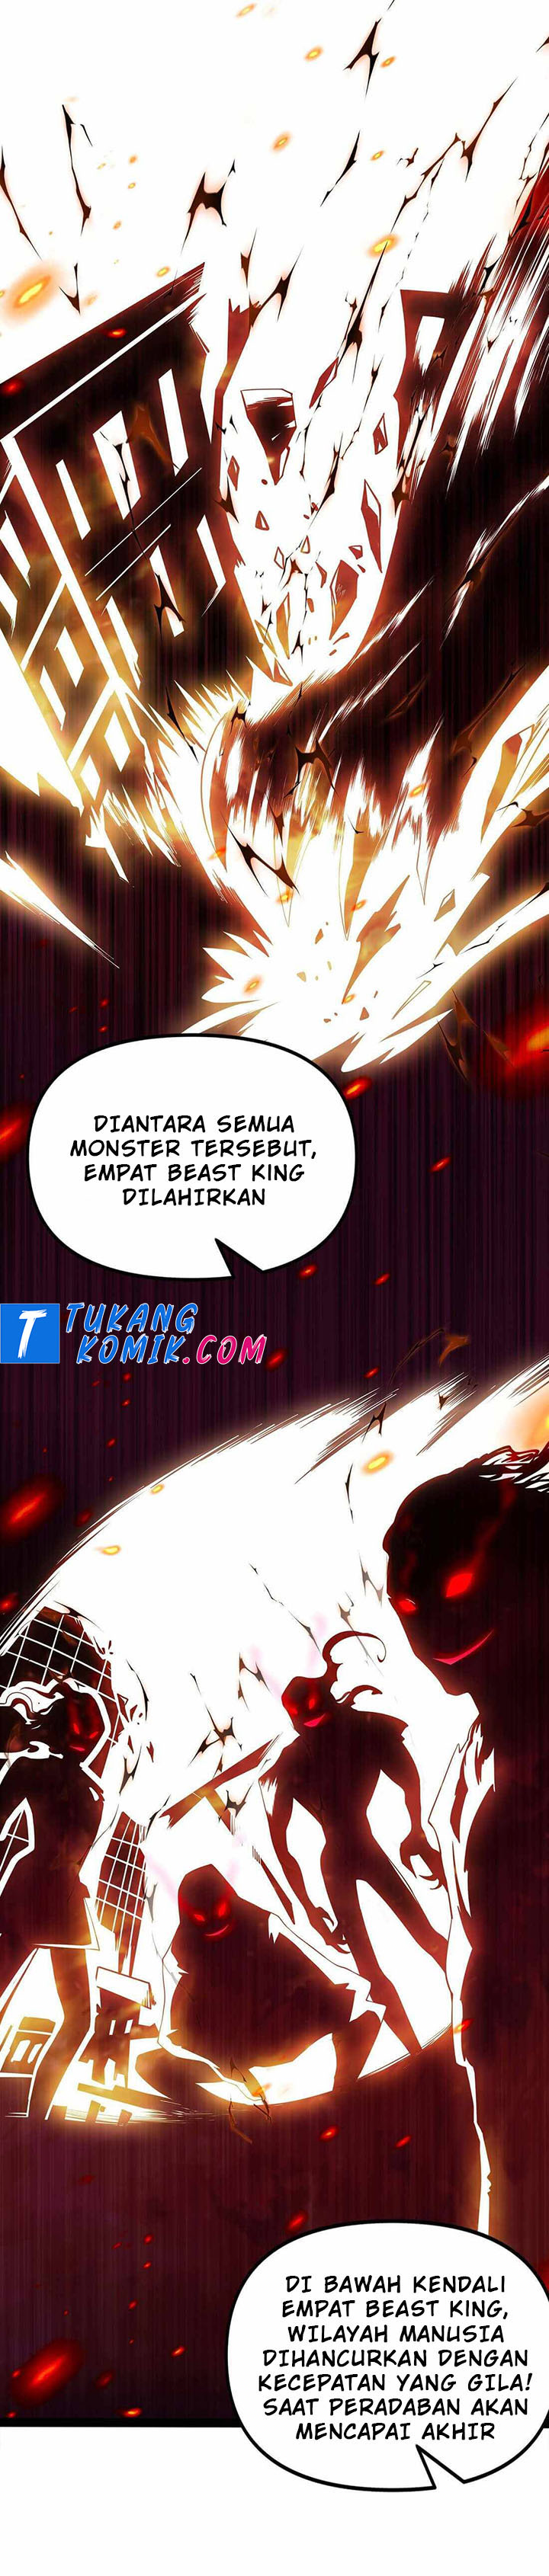 Dilarang COPAS - situs resmi www.mangacanblog.com - Komik age of the gods the world becomes an online game 000 - chapter 0 1 Indonesia age of the gods the world becomes an online game 000 - chapter 0 Terbaru 2|Baca Manga Komik Indonesia|Mangacan